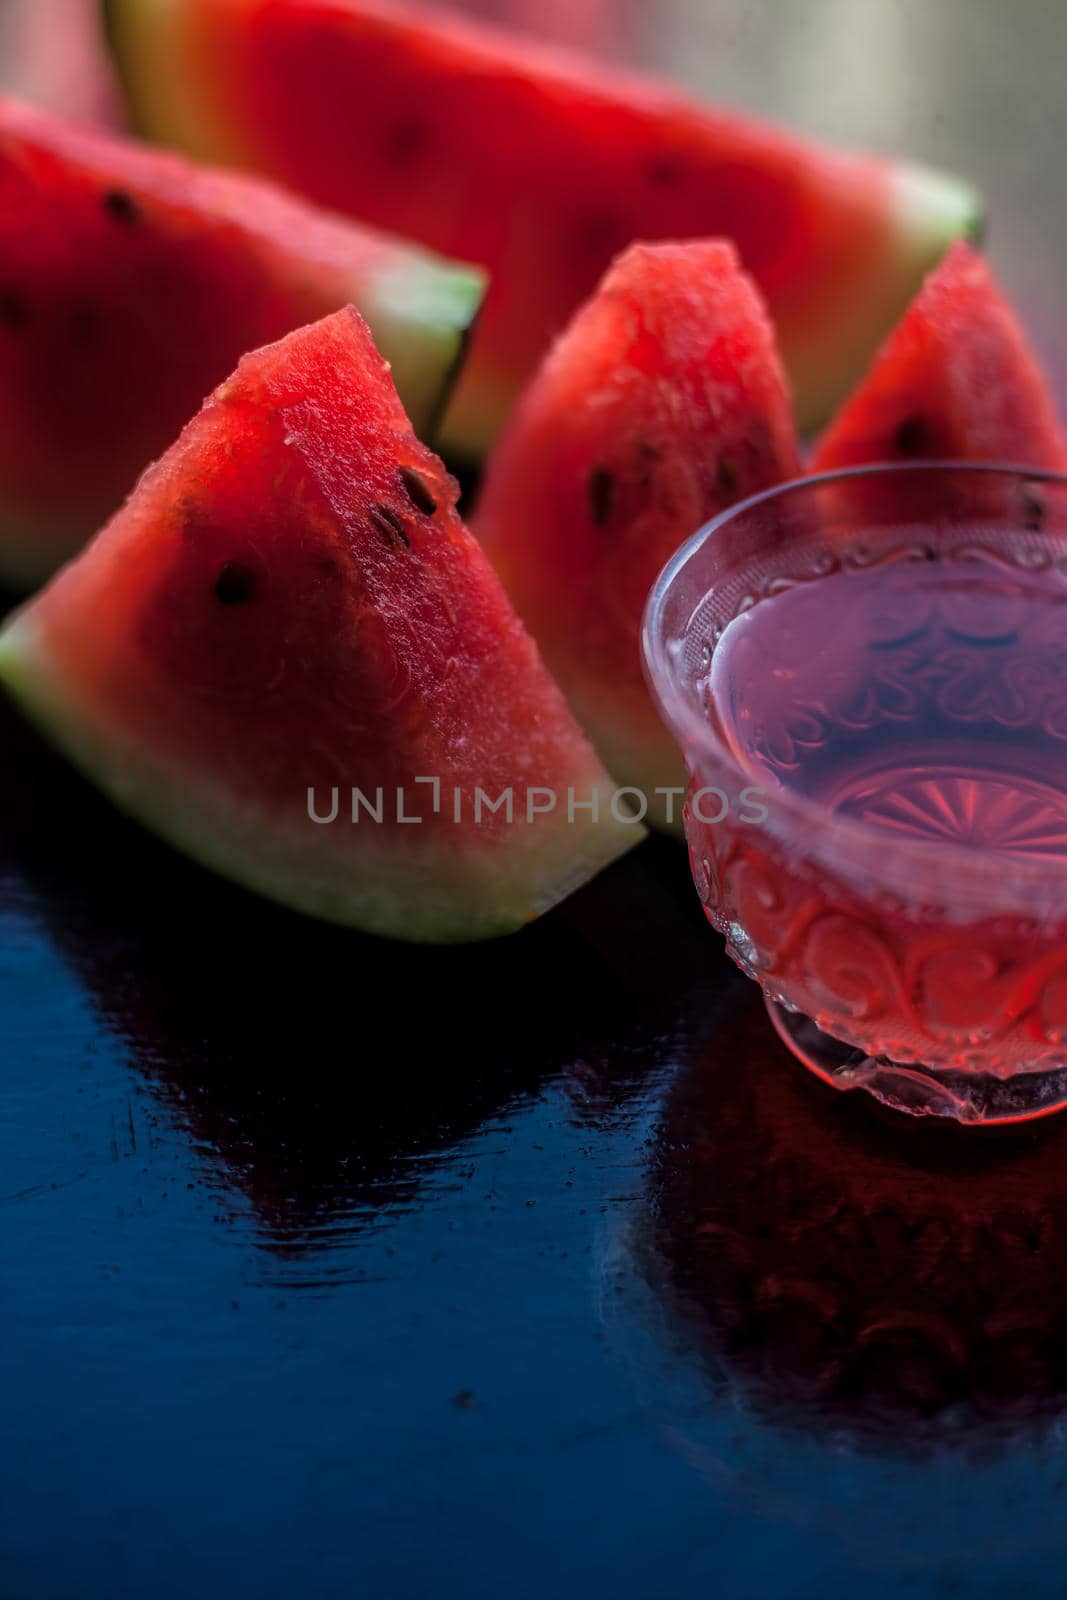 Vertical shot of fruit ice tea of watermelon seeds in a transparent glass cup on wooden surface along with triangular pieces of watermelon.